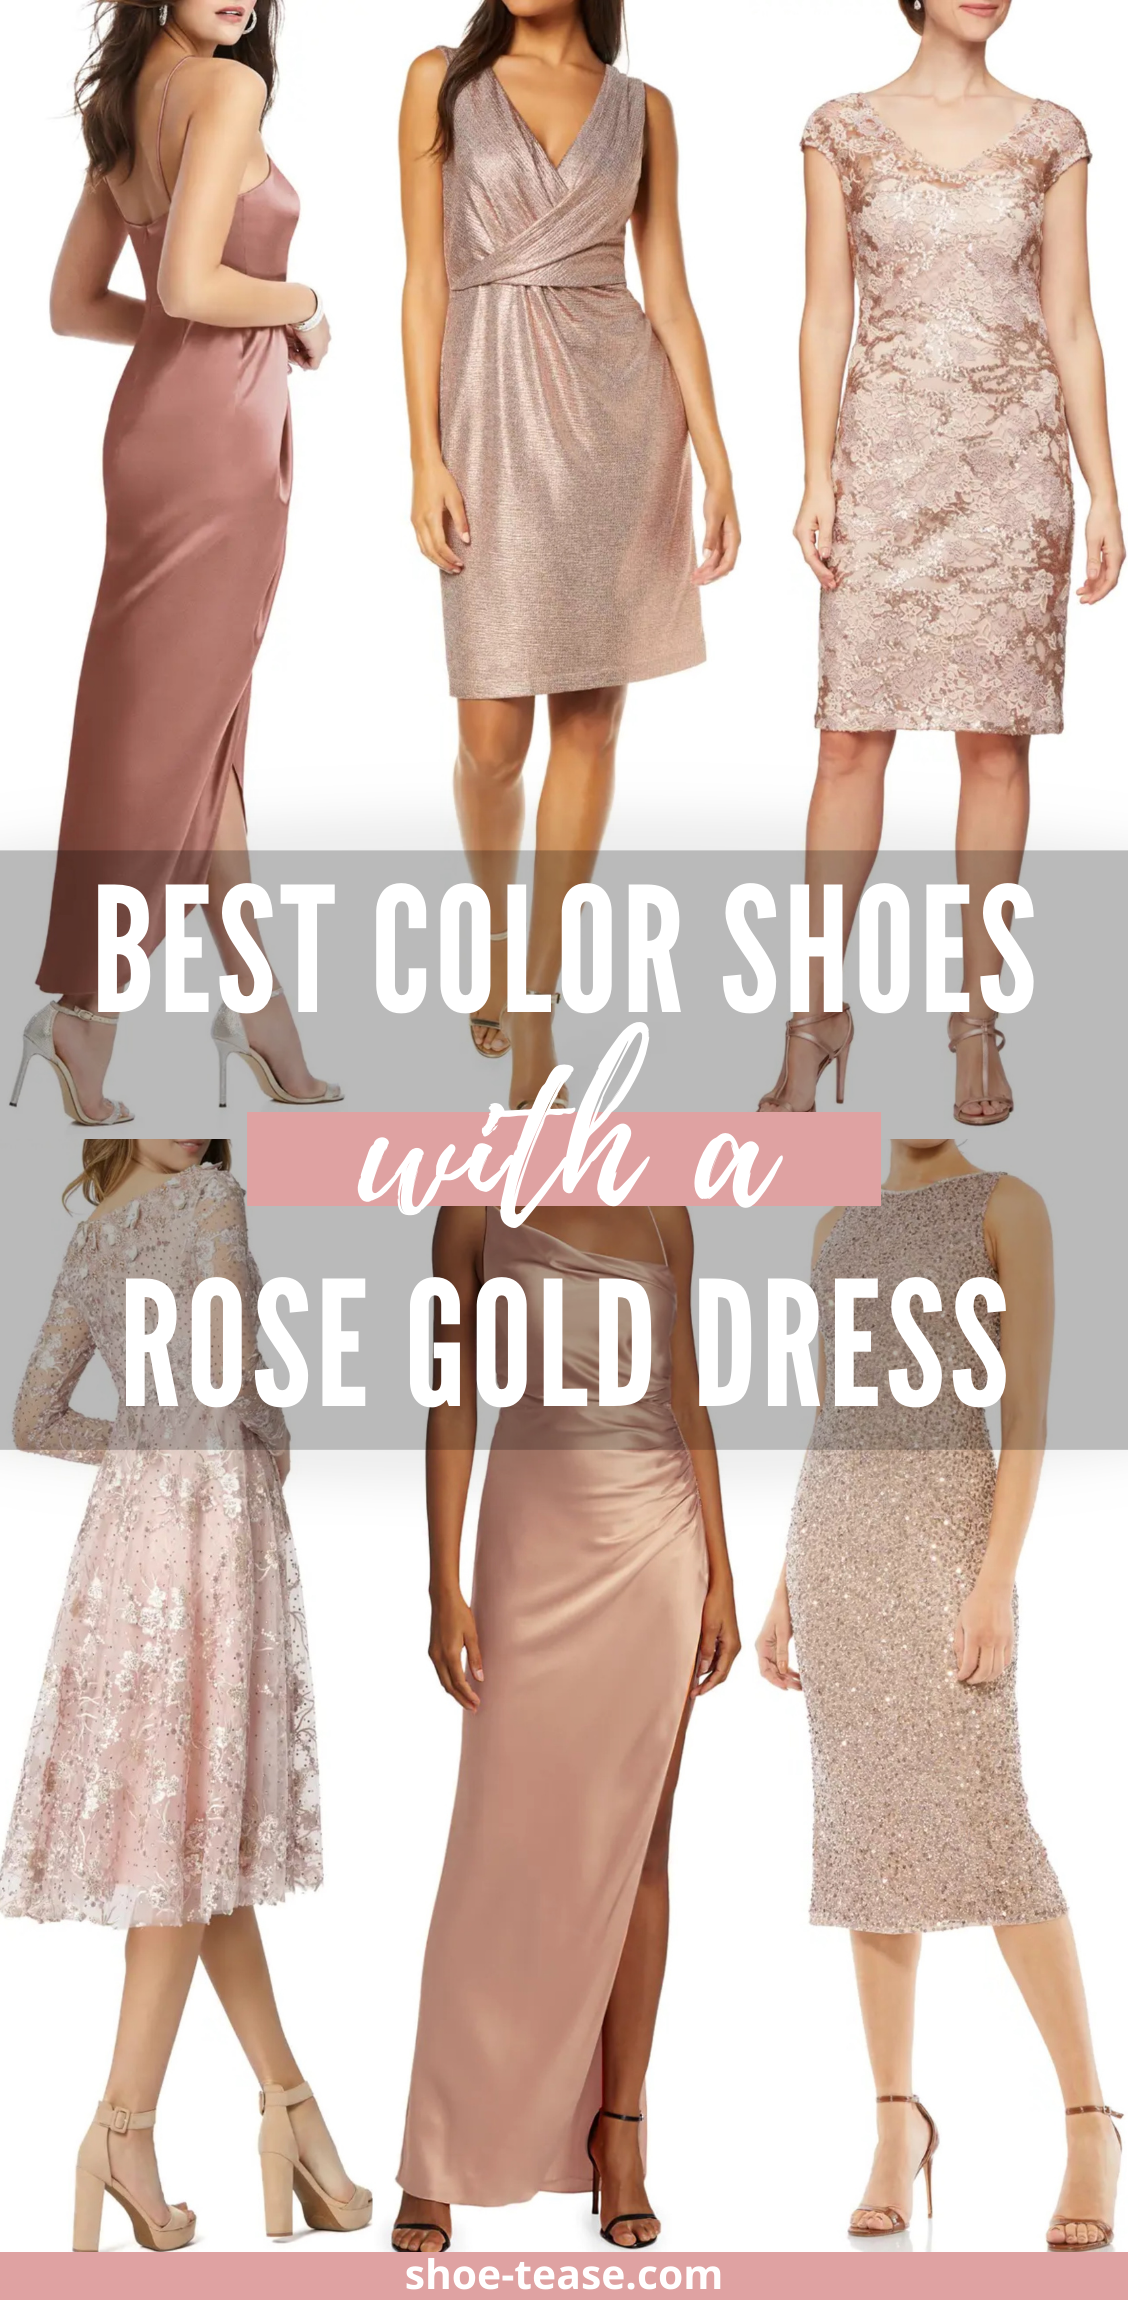 What color shoe to wear with rose gold dress